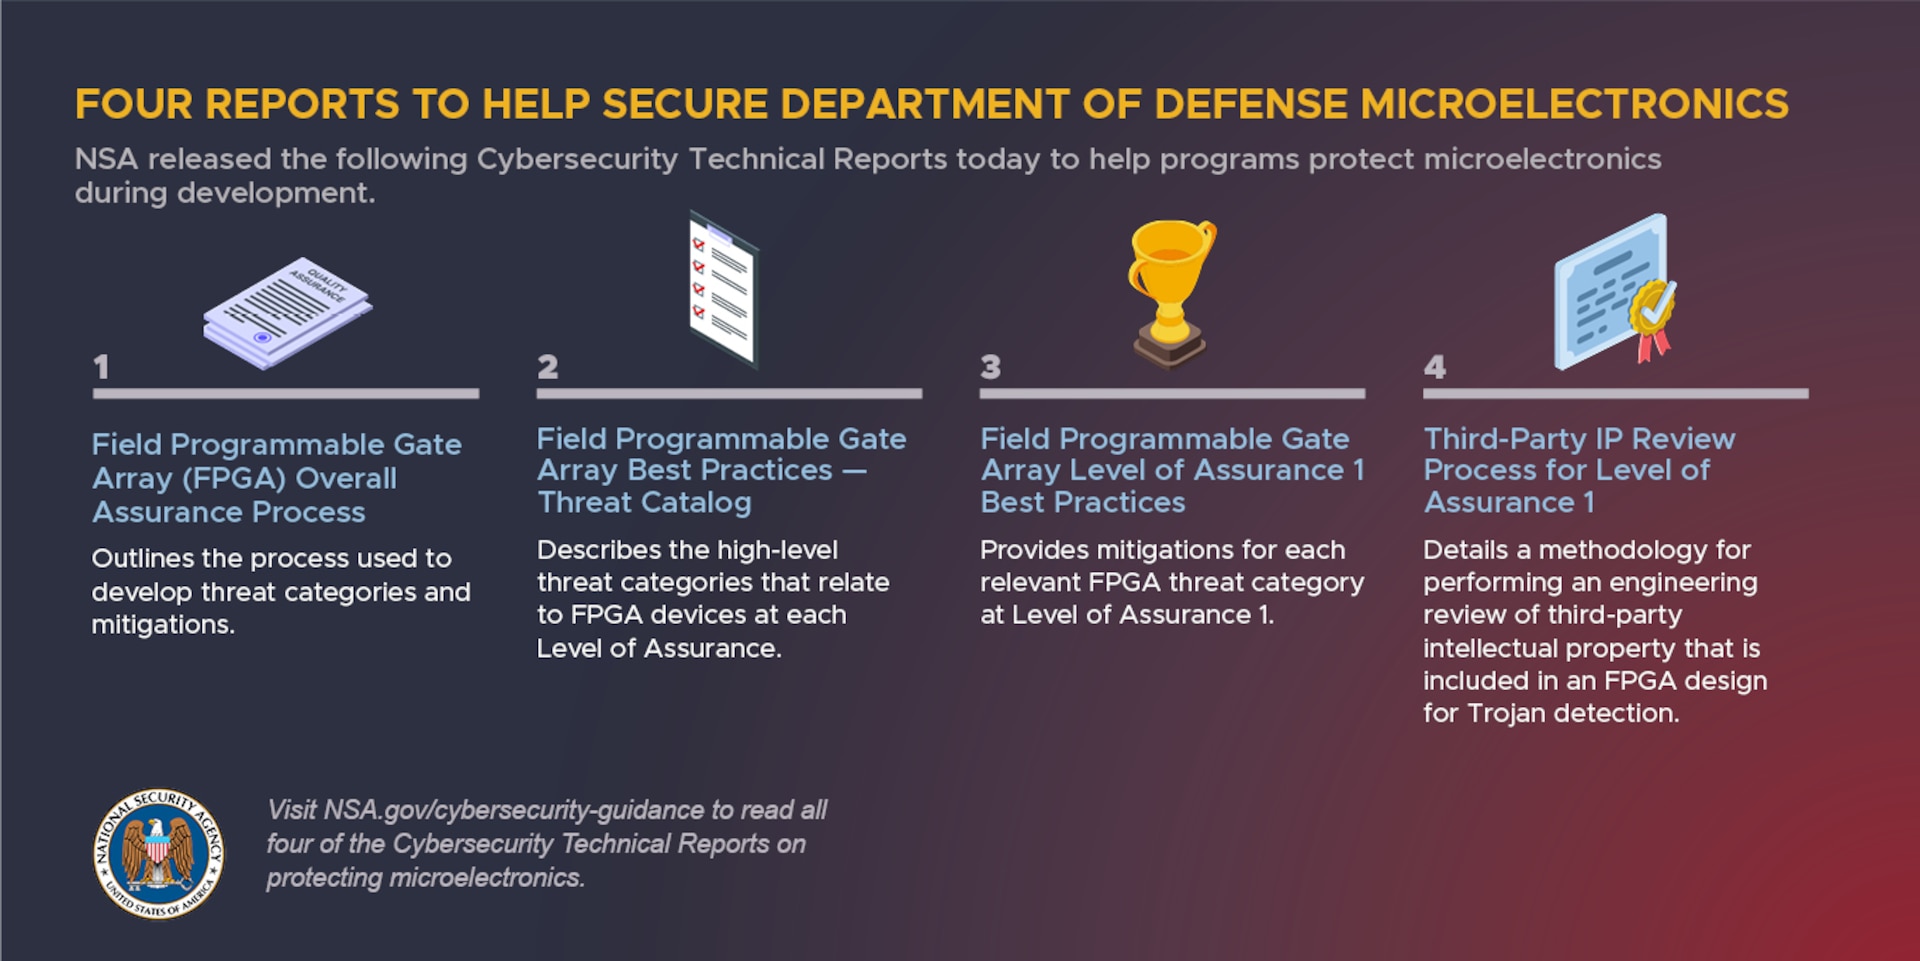 Four reports to help secure Departement of Defense microelectronics